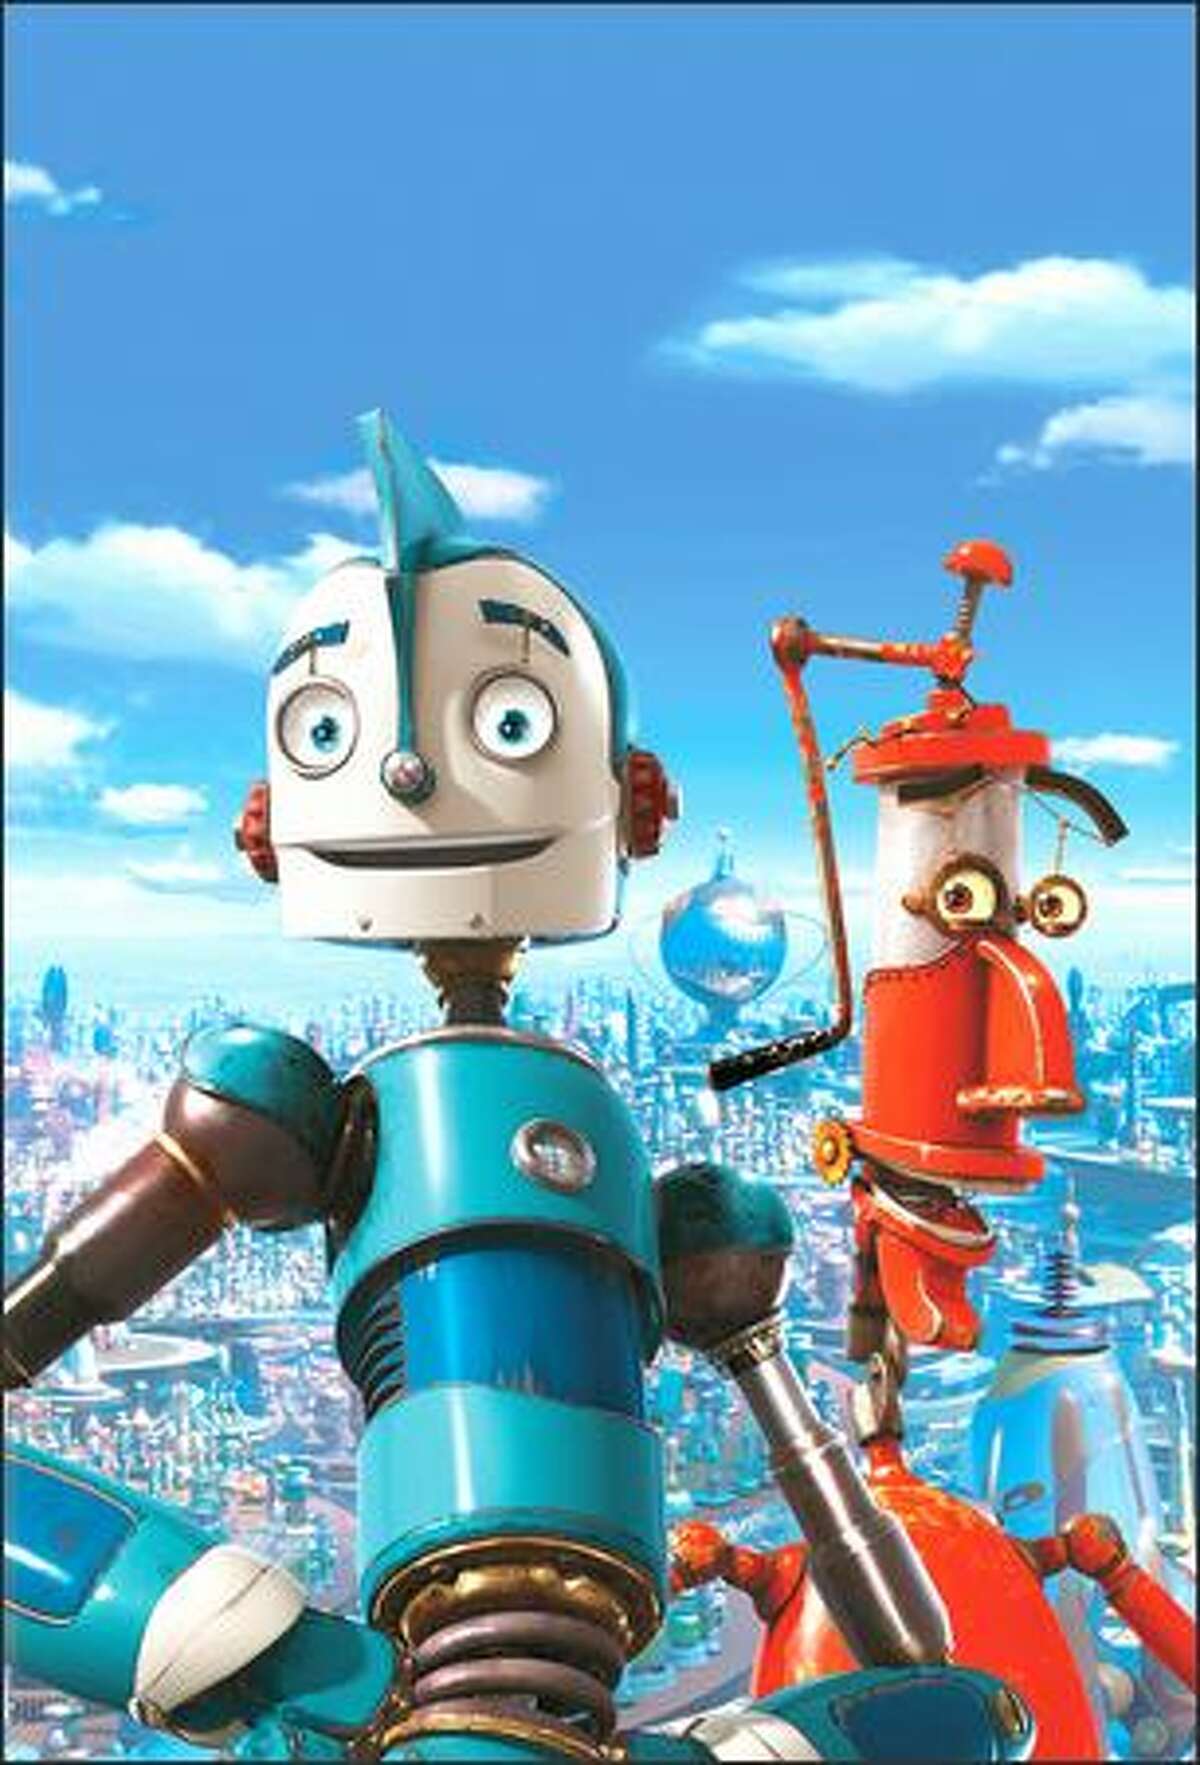 "Robots" is a CGI comedy-adventure set in Robot City, a world inhabited entirely by mechanical creatures. Our hero, young inventor Rodney Copperbottom (voiced by Ewan McGregor, front) dreams of improving life for robots everywhere. His friend Fender (voiced by Robin Williams), meanwhile, is just focused on improving himself with whatever spare parts he can scrounge up.